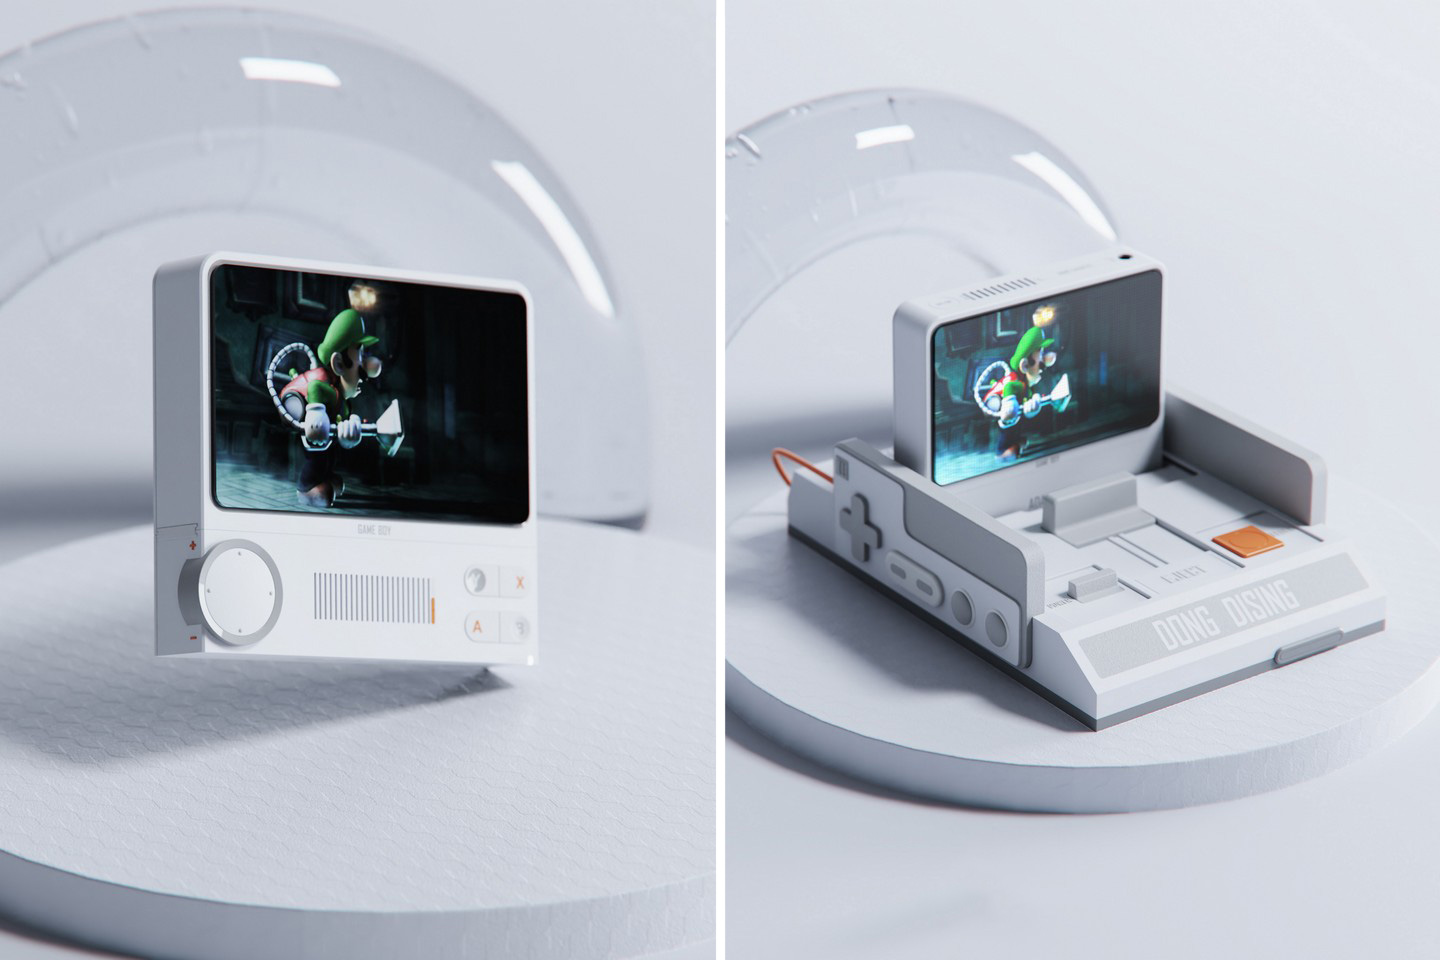 #This shapeshifting Game Boy console has the soul of a Nintendo Switch